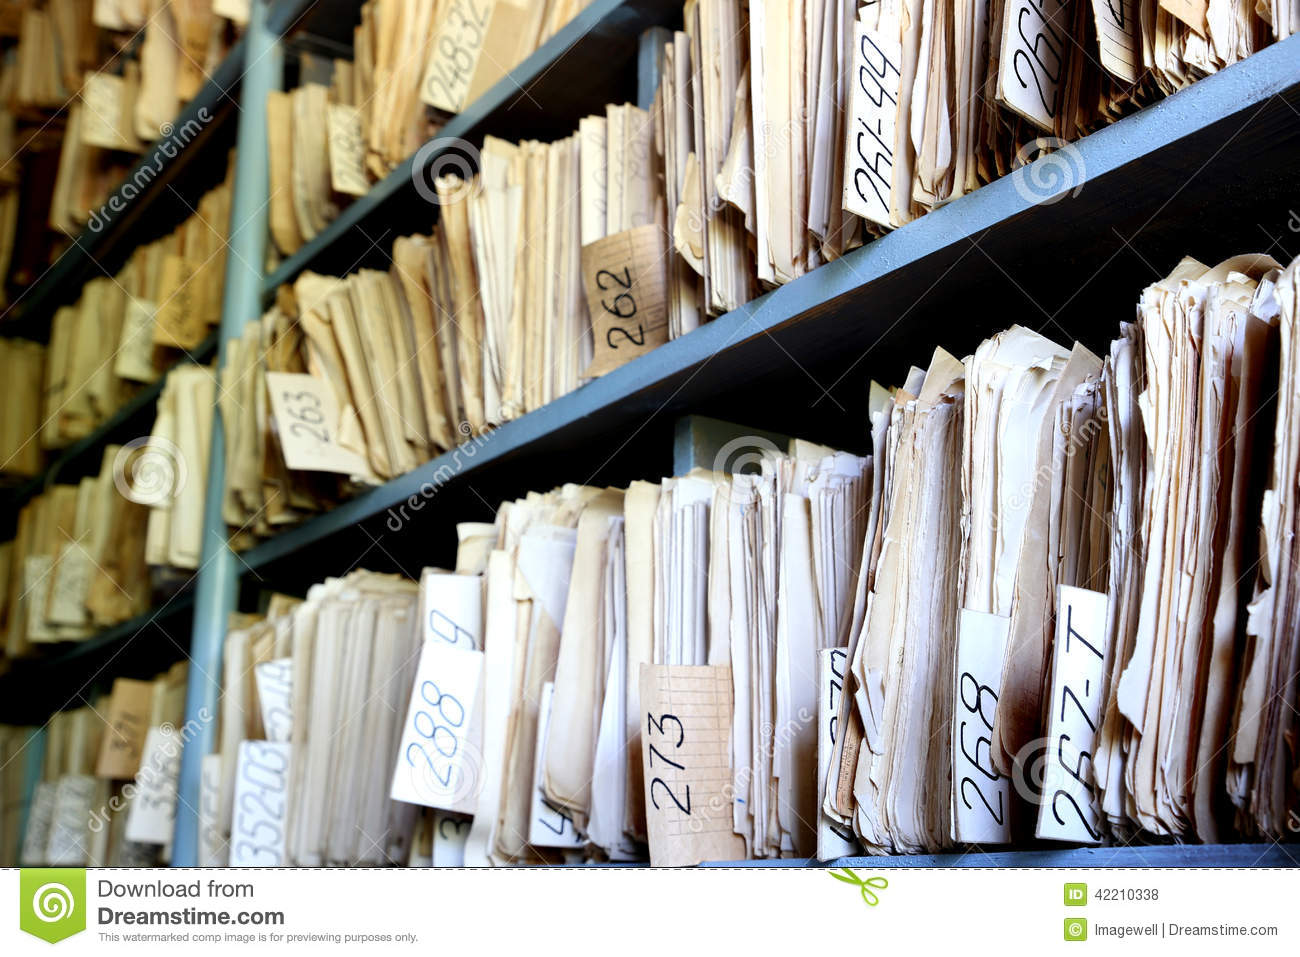 Shelves Full Of Files In A Messy Old Fashioned Archive